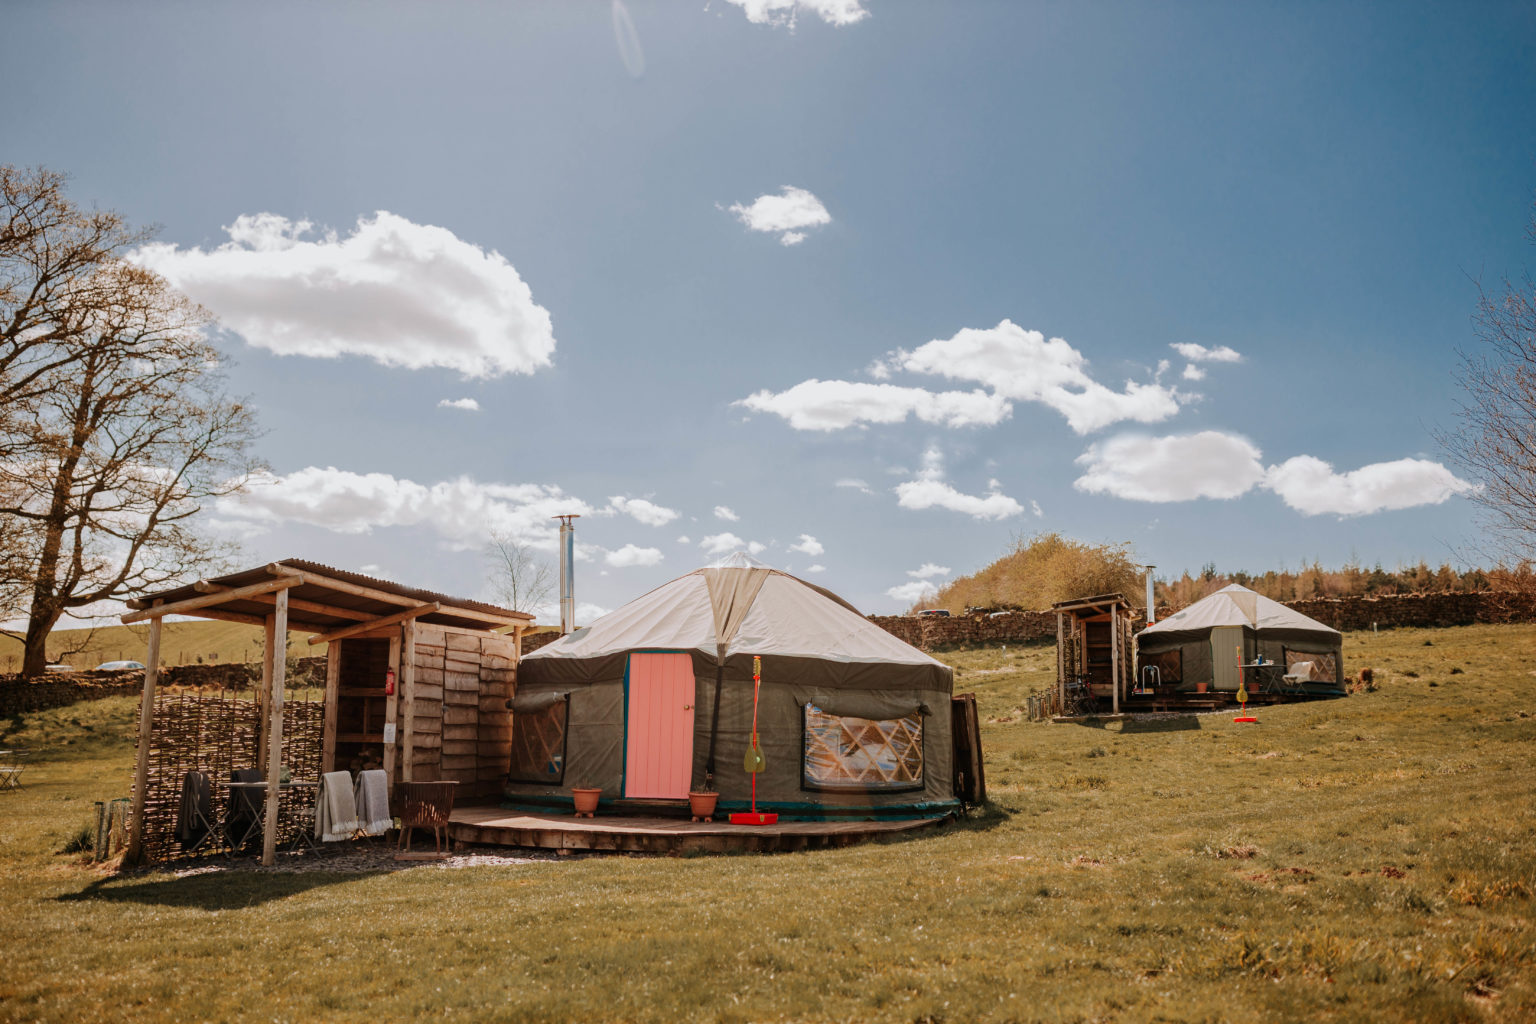 Meadow Yurts at Swinton Bivouac, near the Yorkshire Dales in North Yorkshire